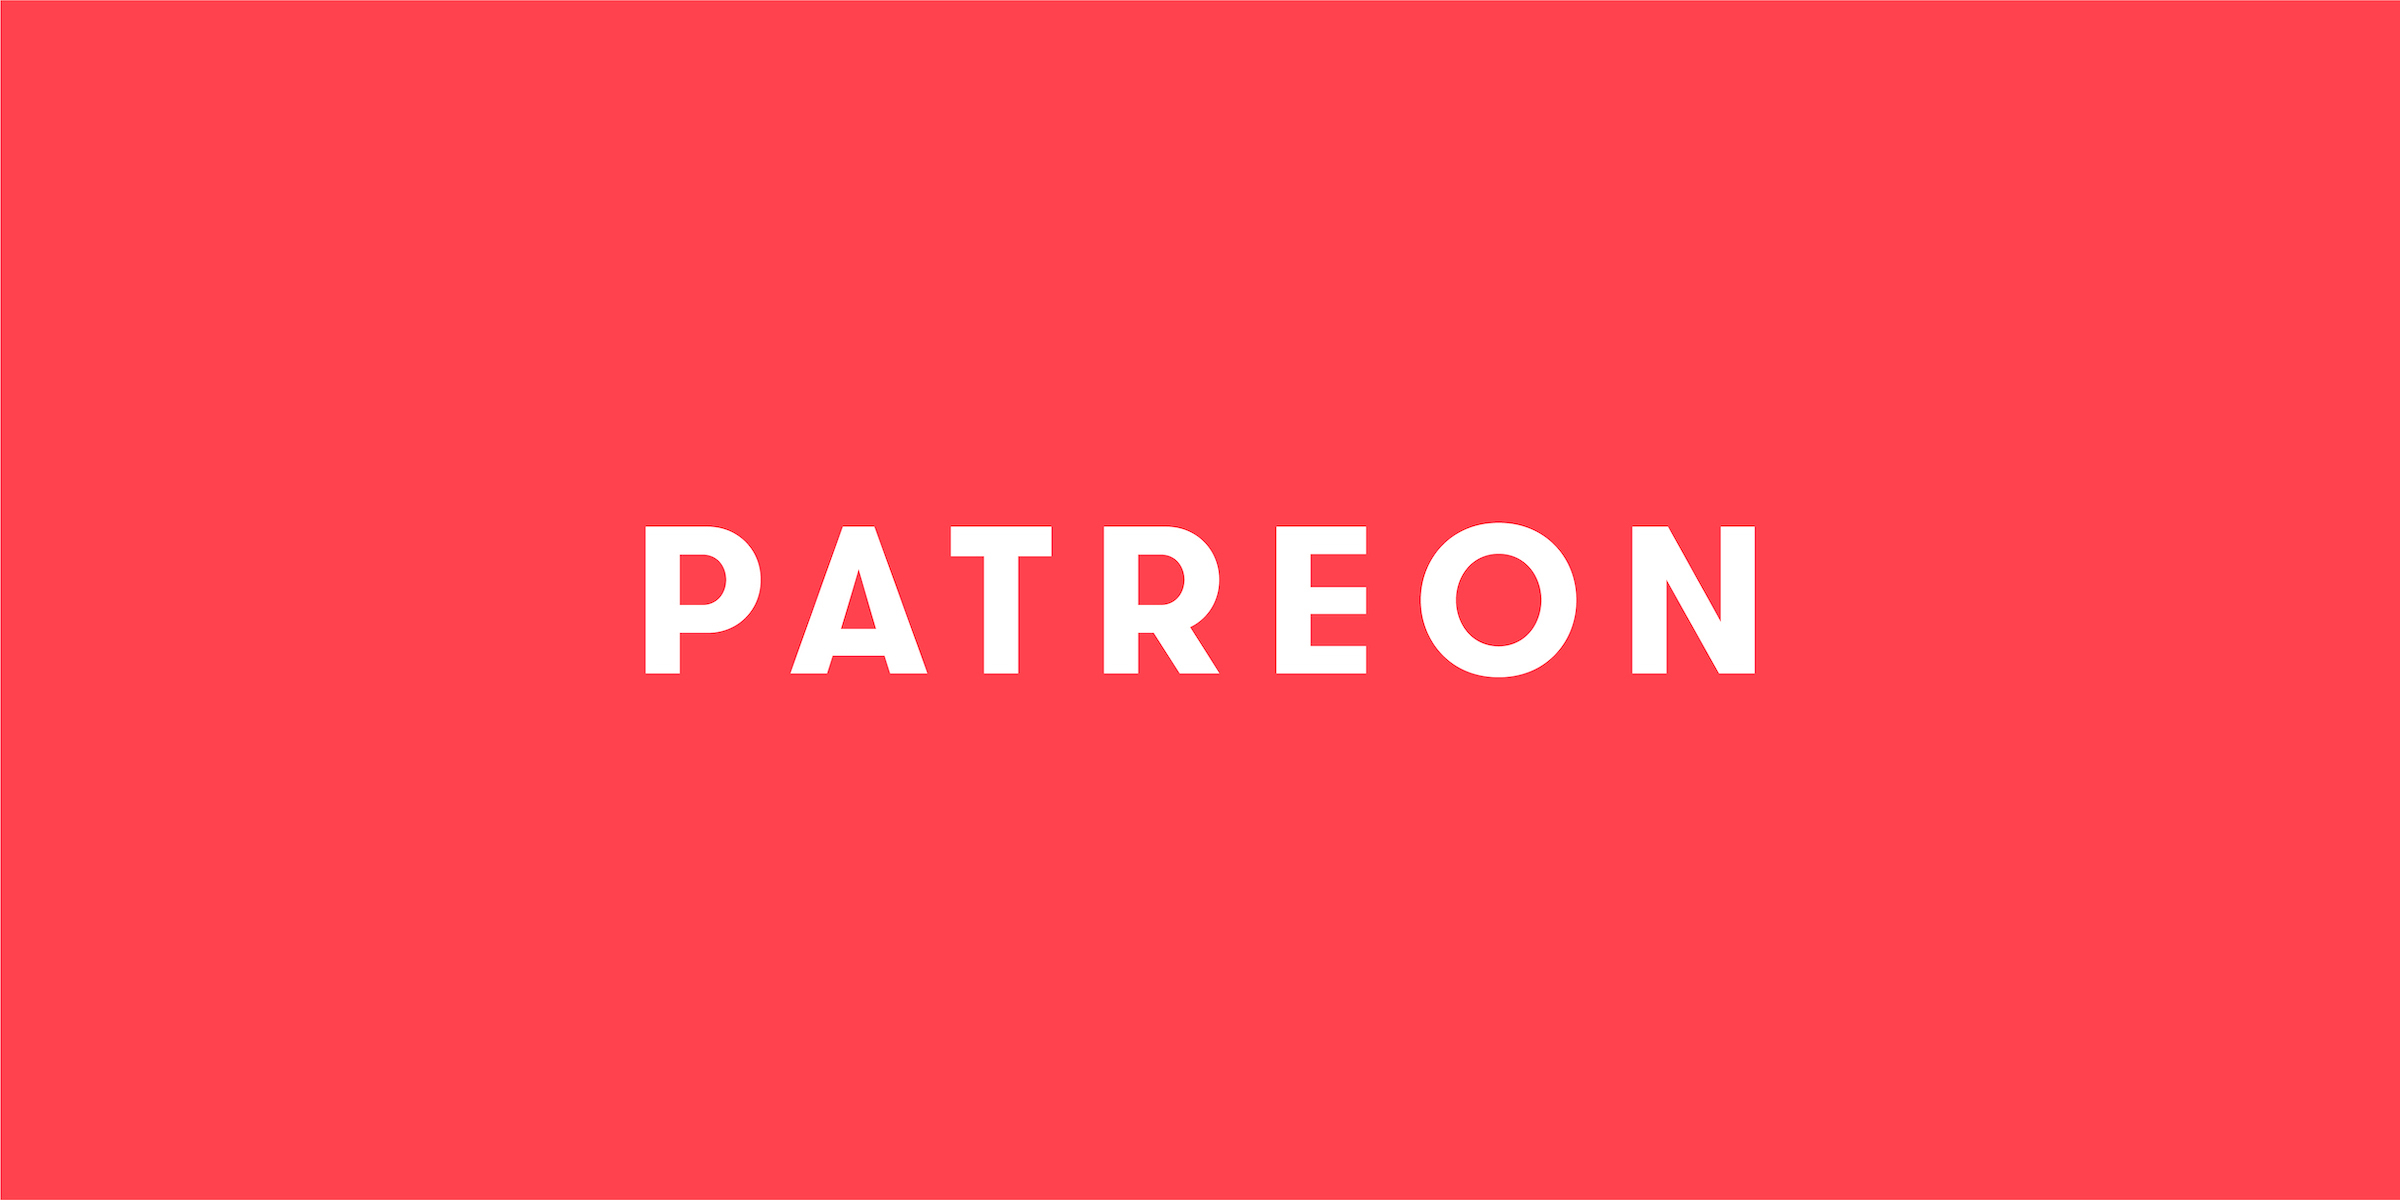 Patreon logo in coral with white text